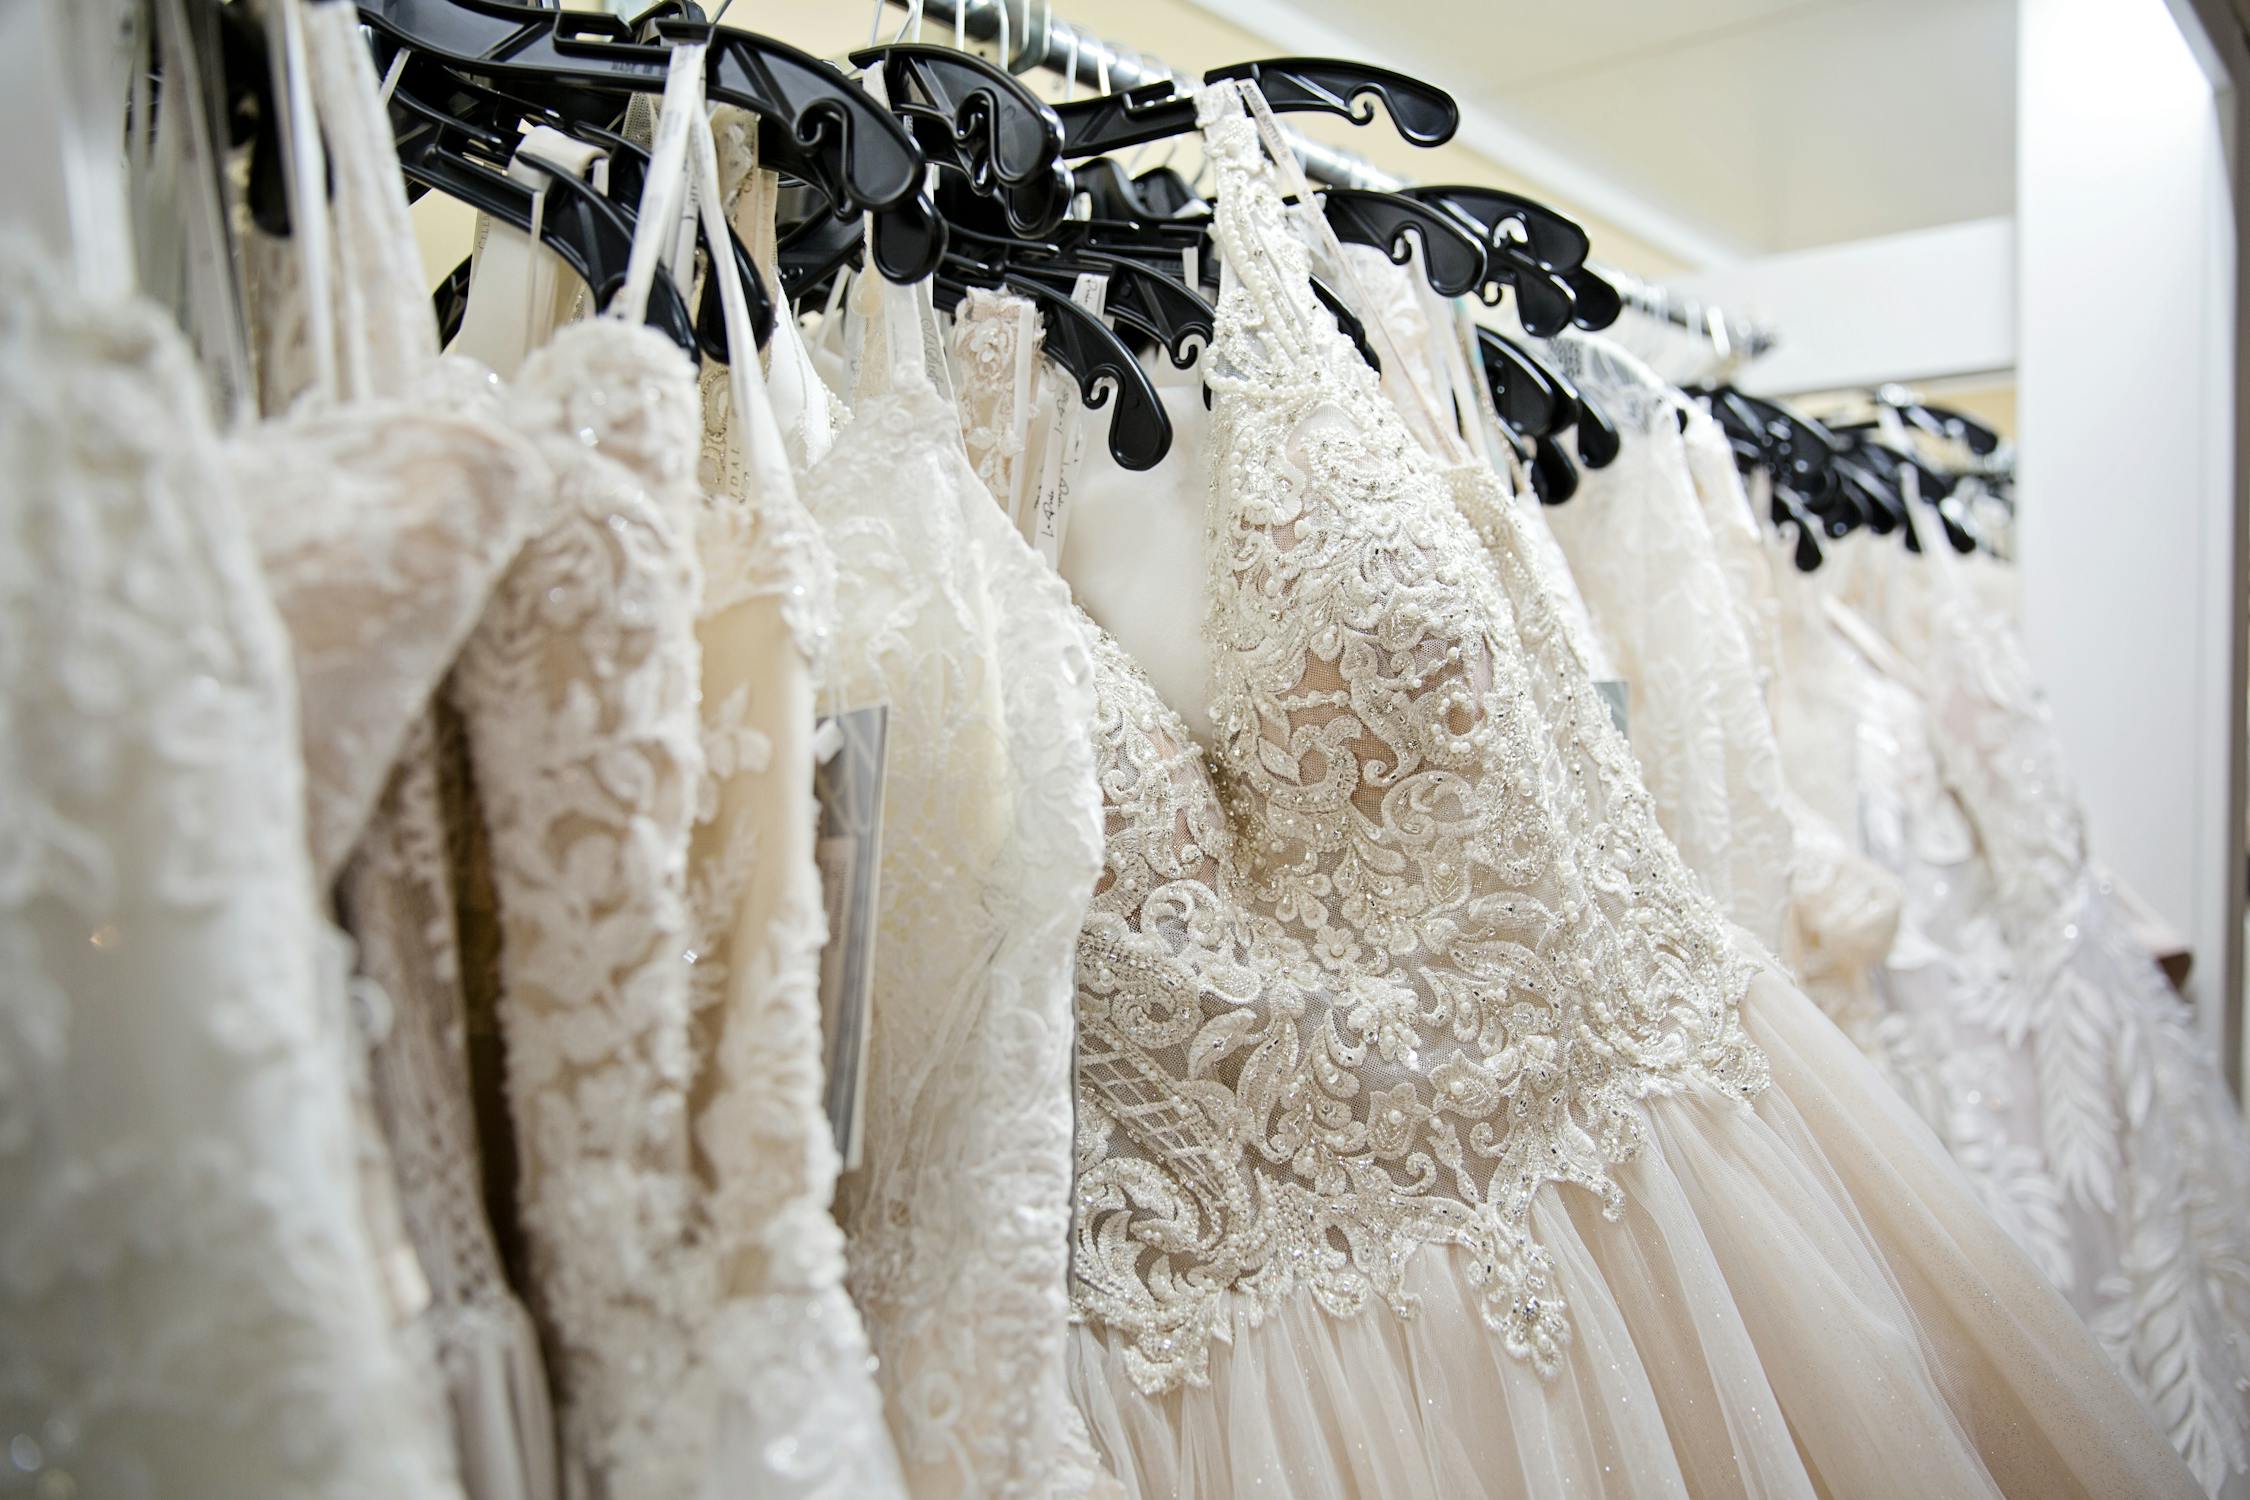 The Importance of Finding the Best Bridal Shop